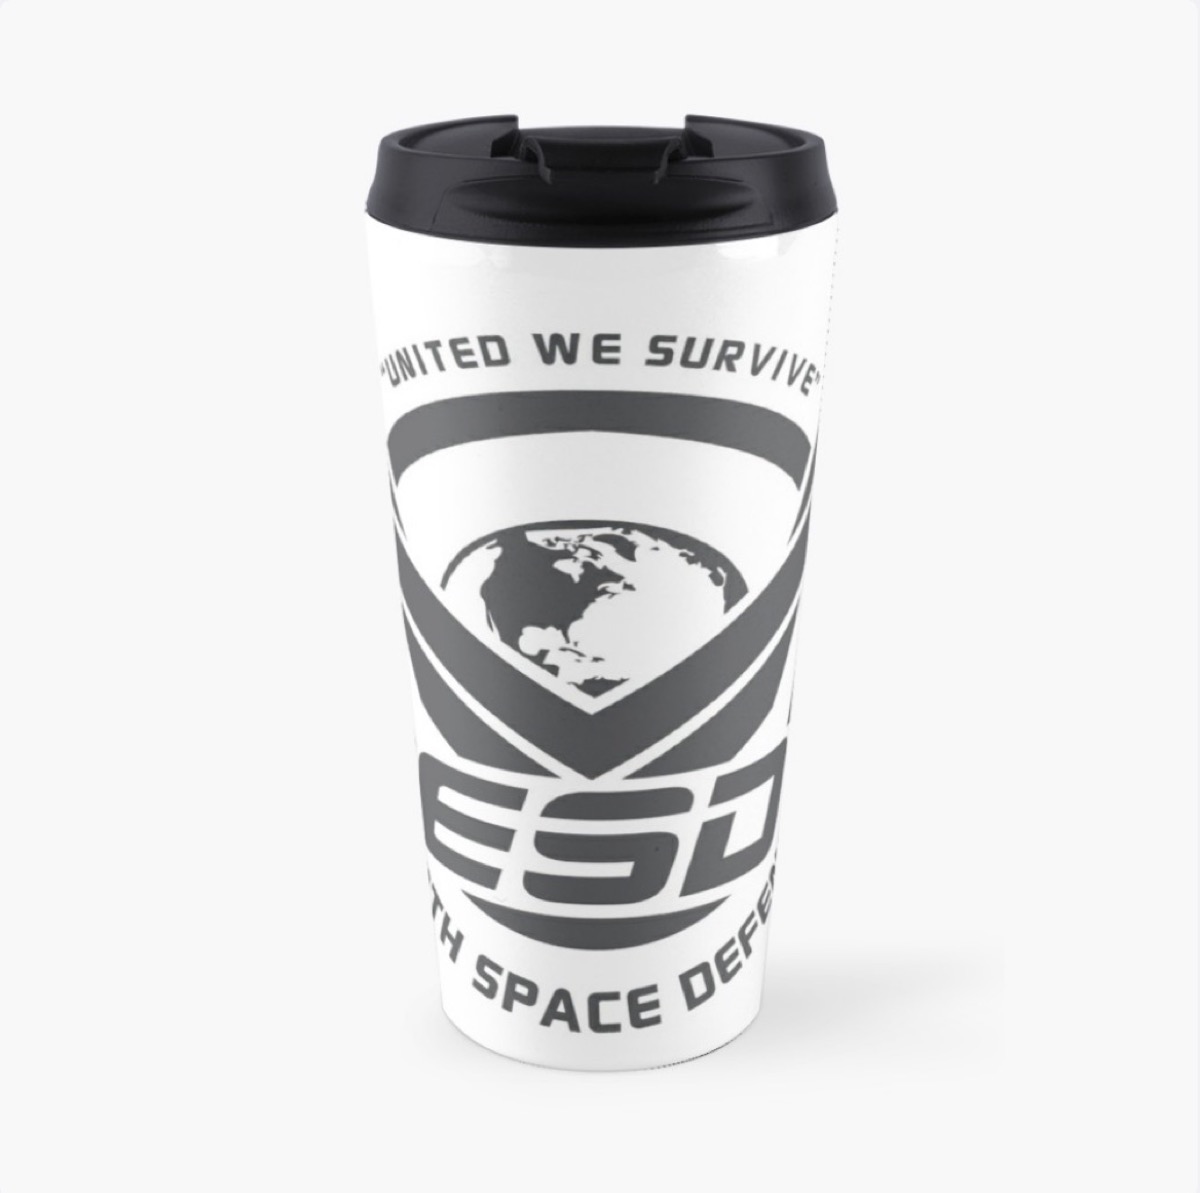 earth space defense mug, independence day gifts